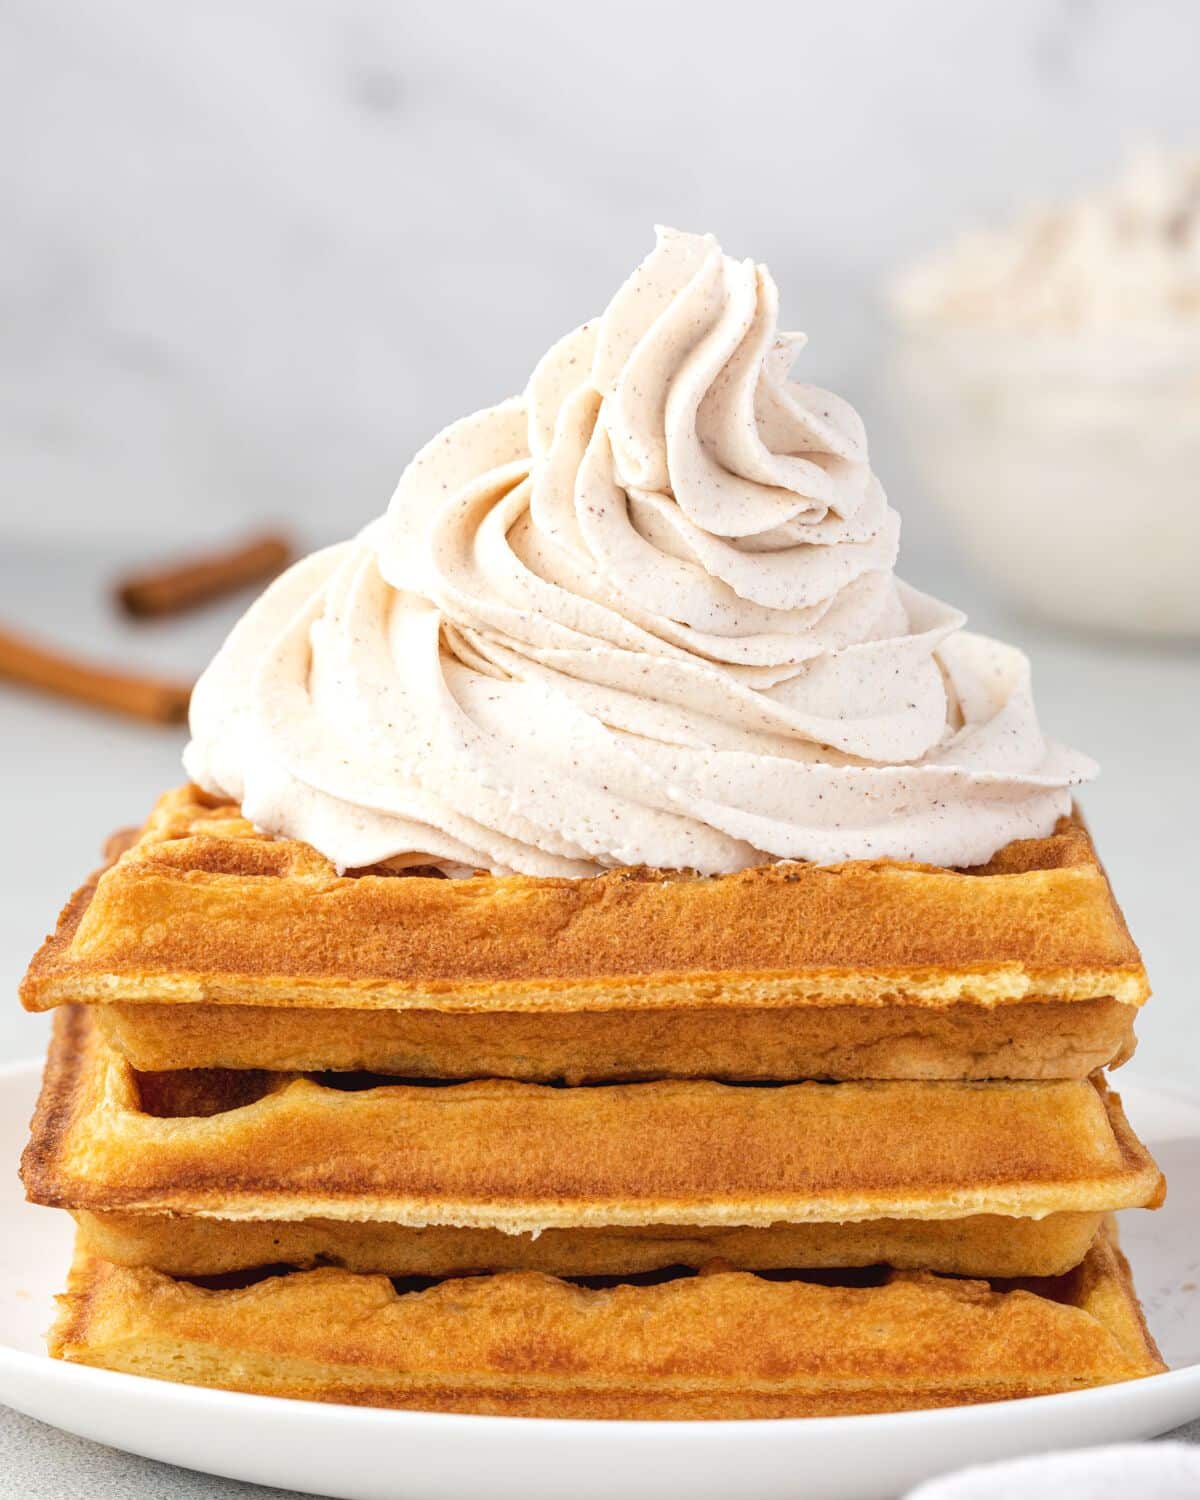 A stack of 3 waffles topped with a pile of piped whipped cream.